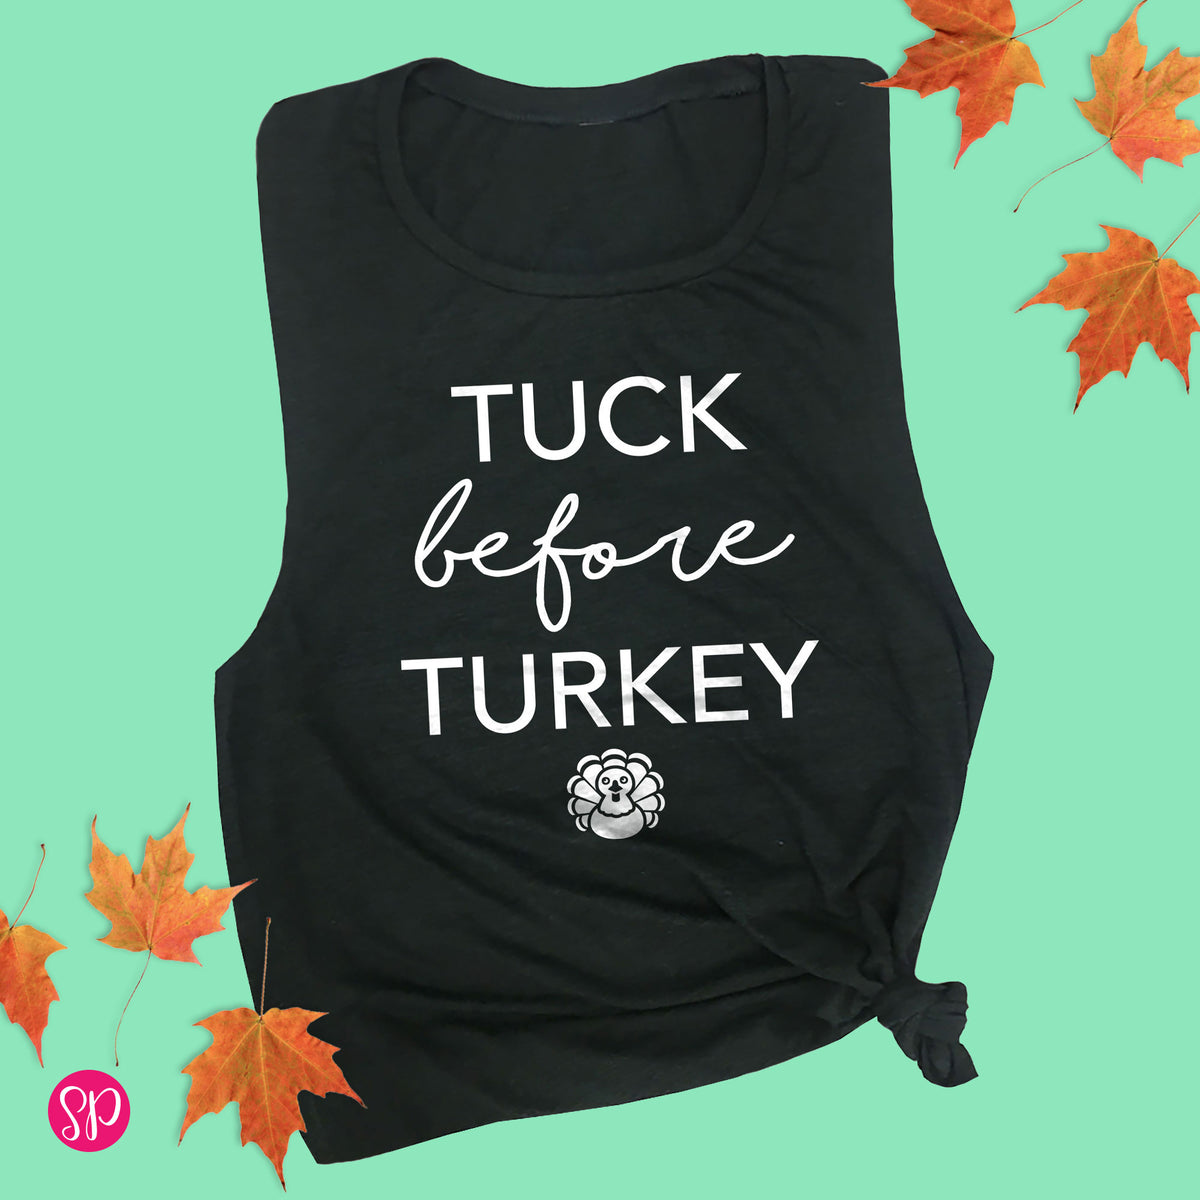 Tuck Before Turkey Muscle Tee Barre Workout Dance Pilates Fitness Graphic Tank Top Shirt